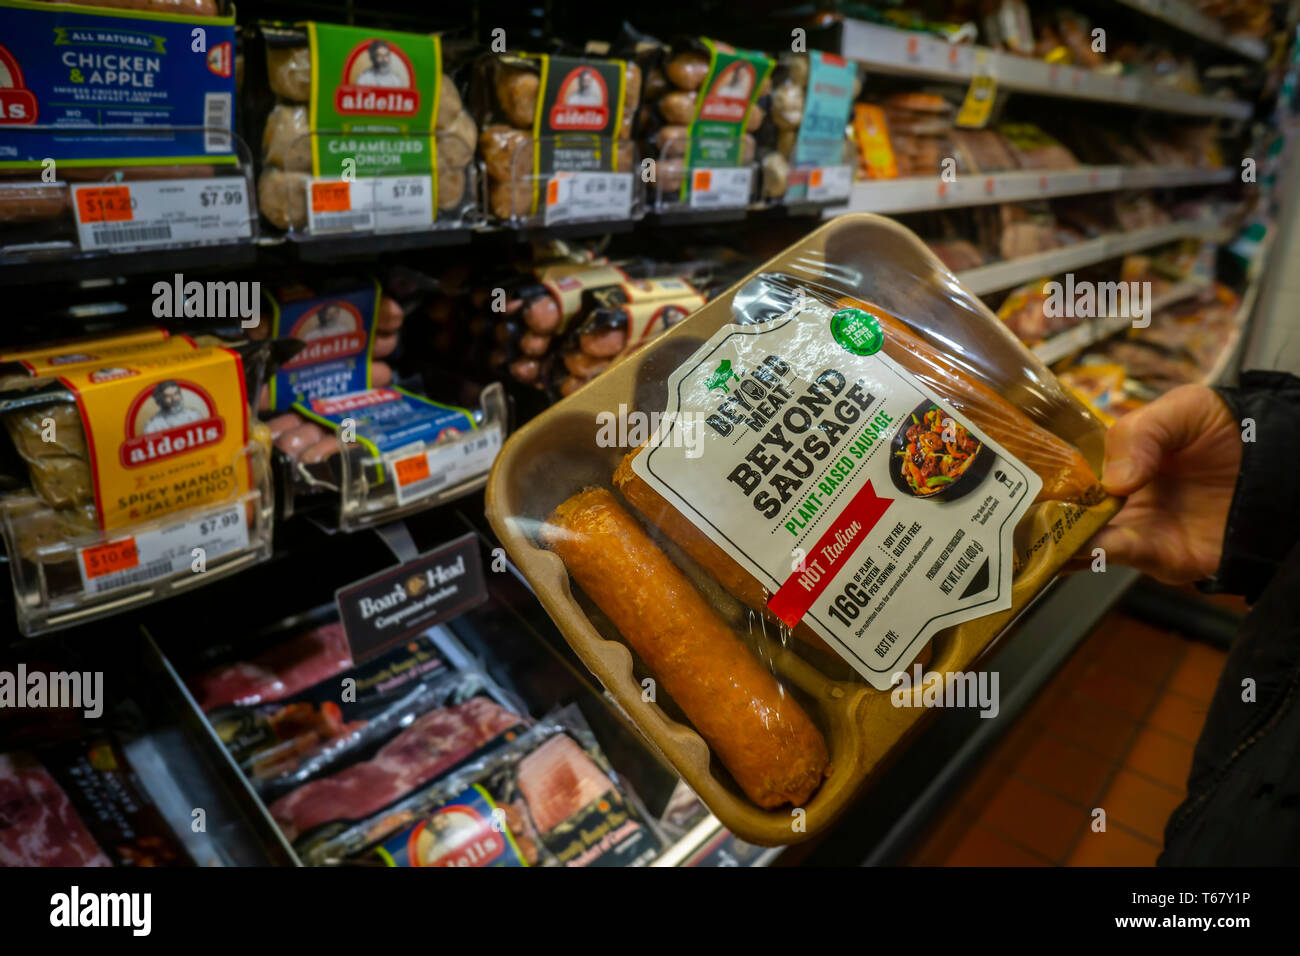 A shopper chooses a package of Beyond Meat brand Beyond Sausage from a cooler in a supermarket in New York on Monday, April 22, 2019. The plant-based protein start-up Beyond Meat has filed for an initial public offering and is expecting the share price to be between $19 and $21 valuing the company over $1 billion, well into the “unicorn” realm. (© Richard B. Levine) Stock Photo